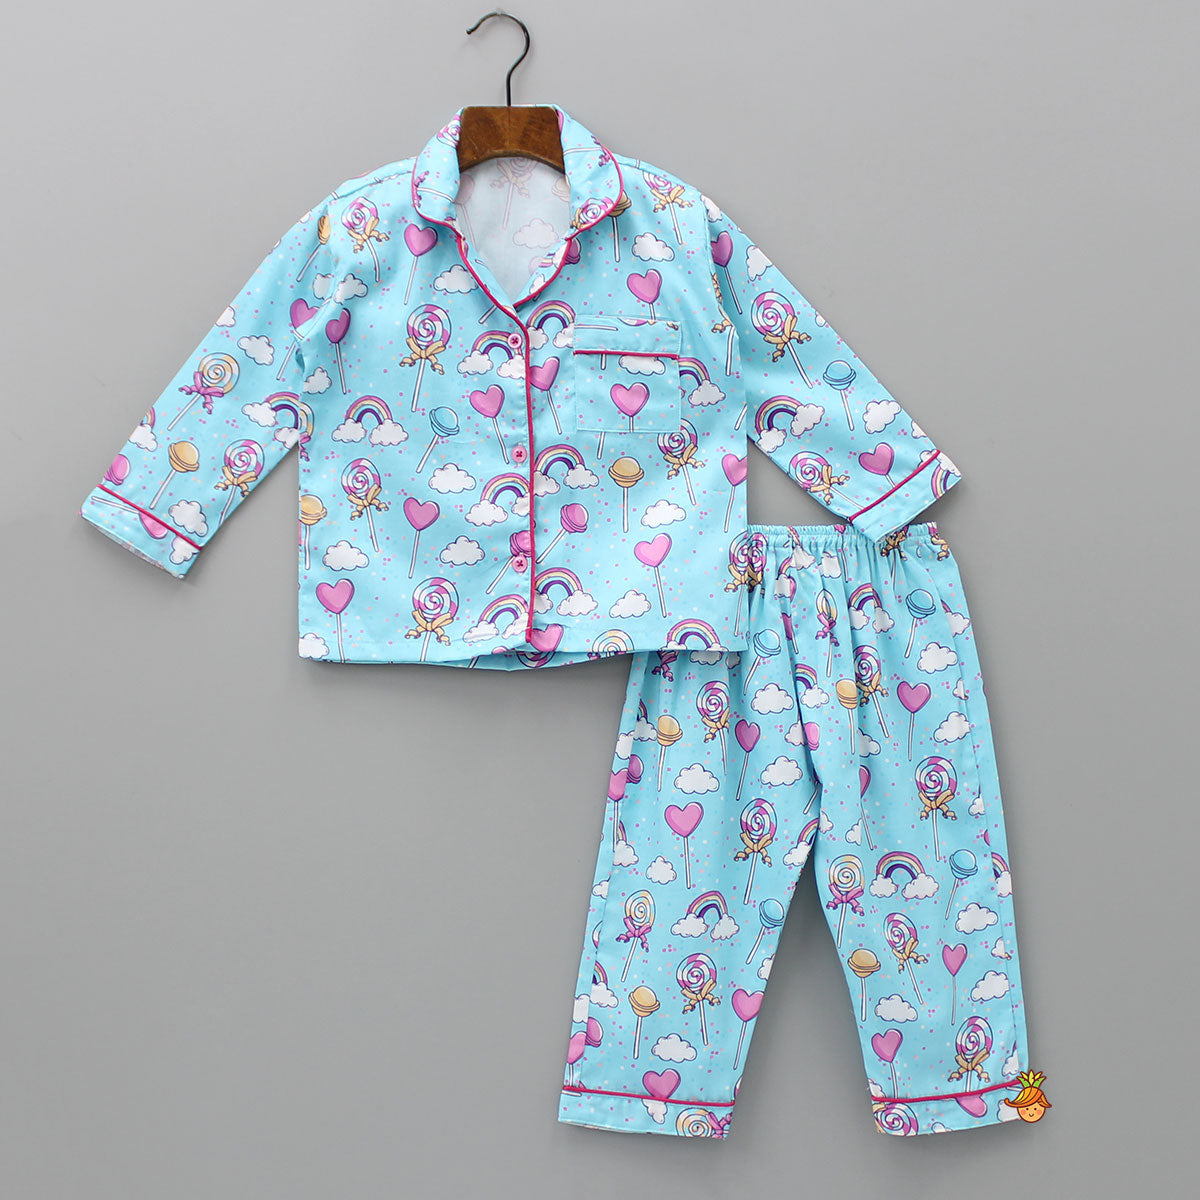 Pre Order: Candy Printed Pure Cotton Blue Sleepwear